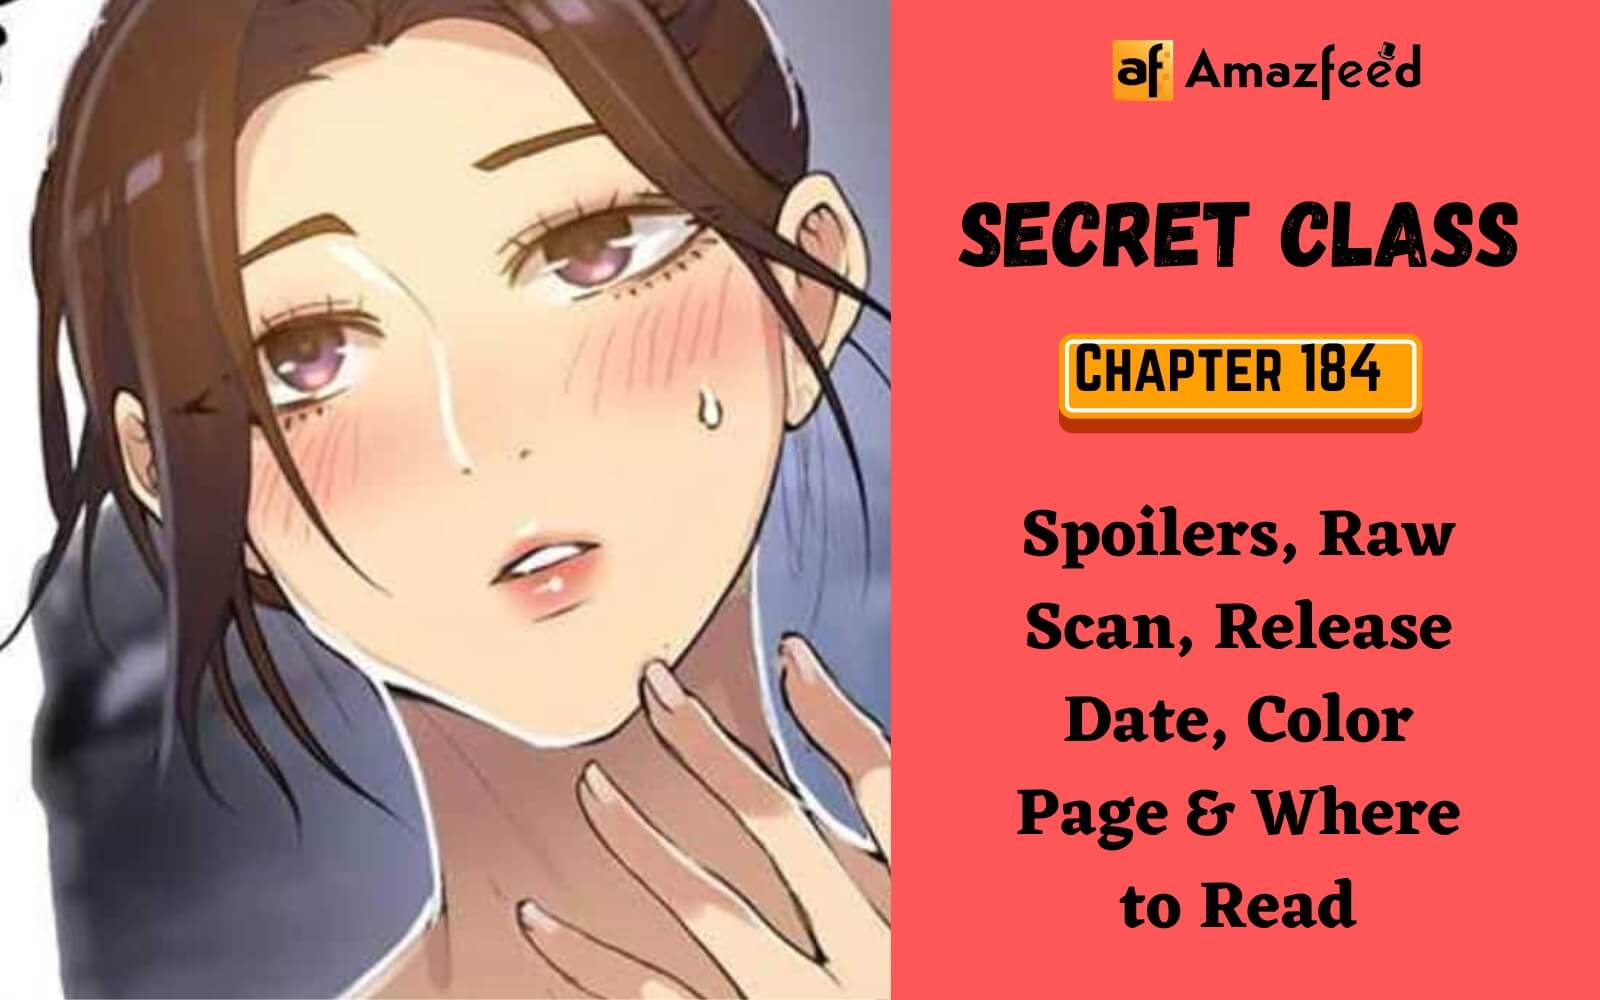 Secret Class Chapter 184 Release Date, Spoilers, Raw Scan, Color Page &  Where to Read » Amazfeed